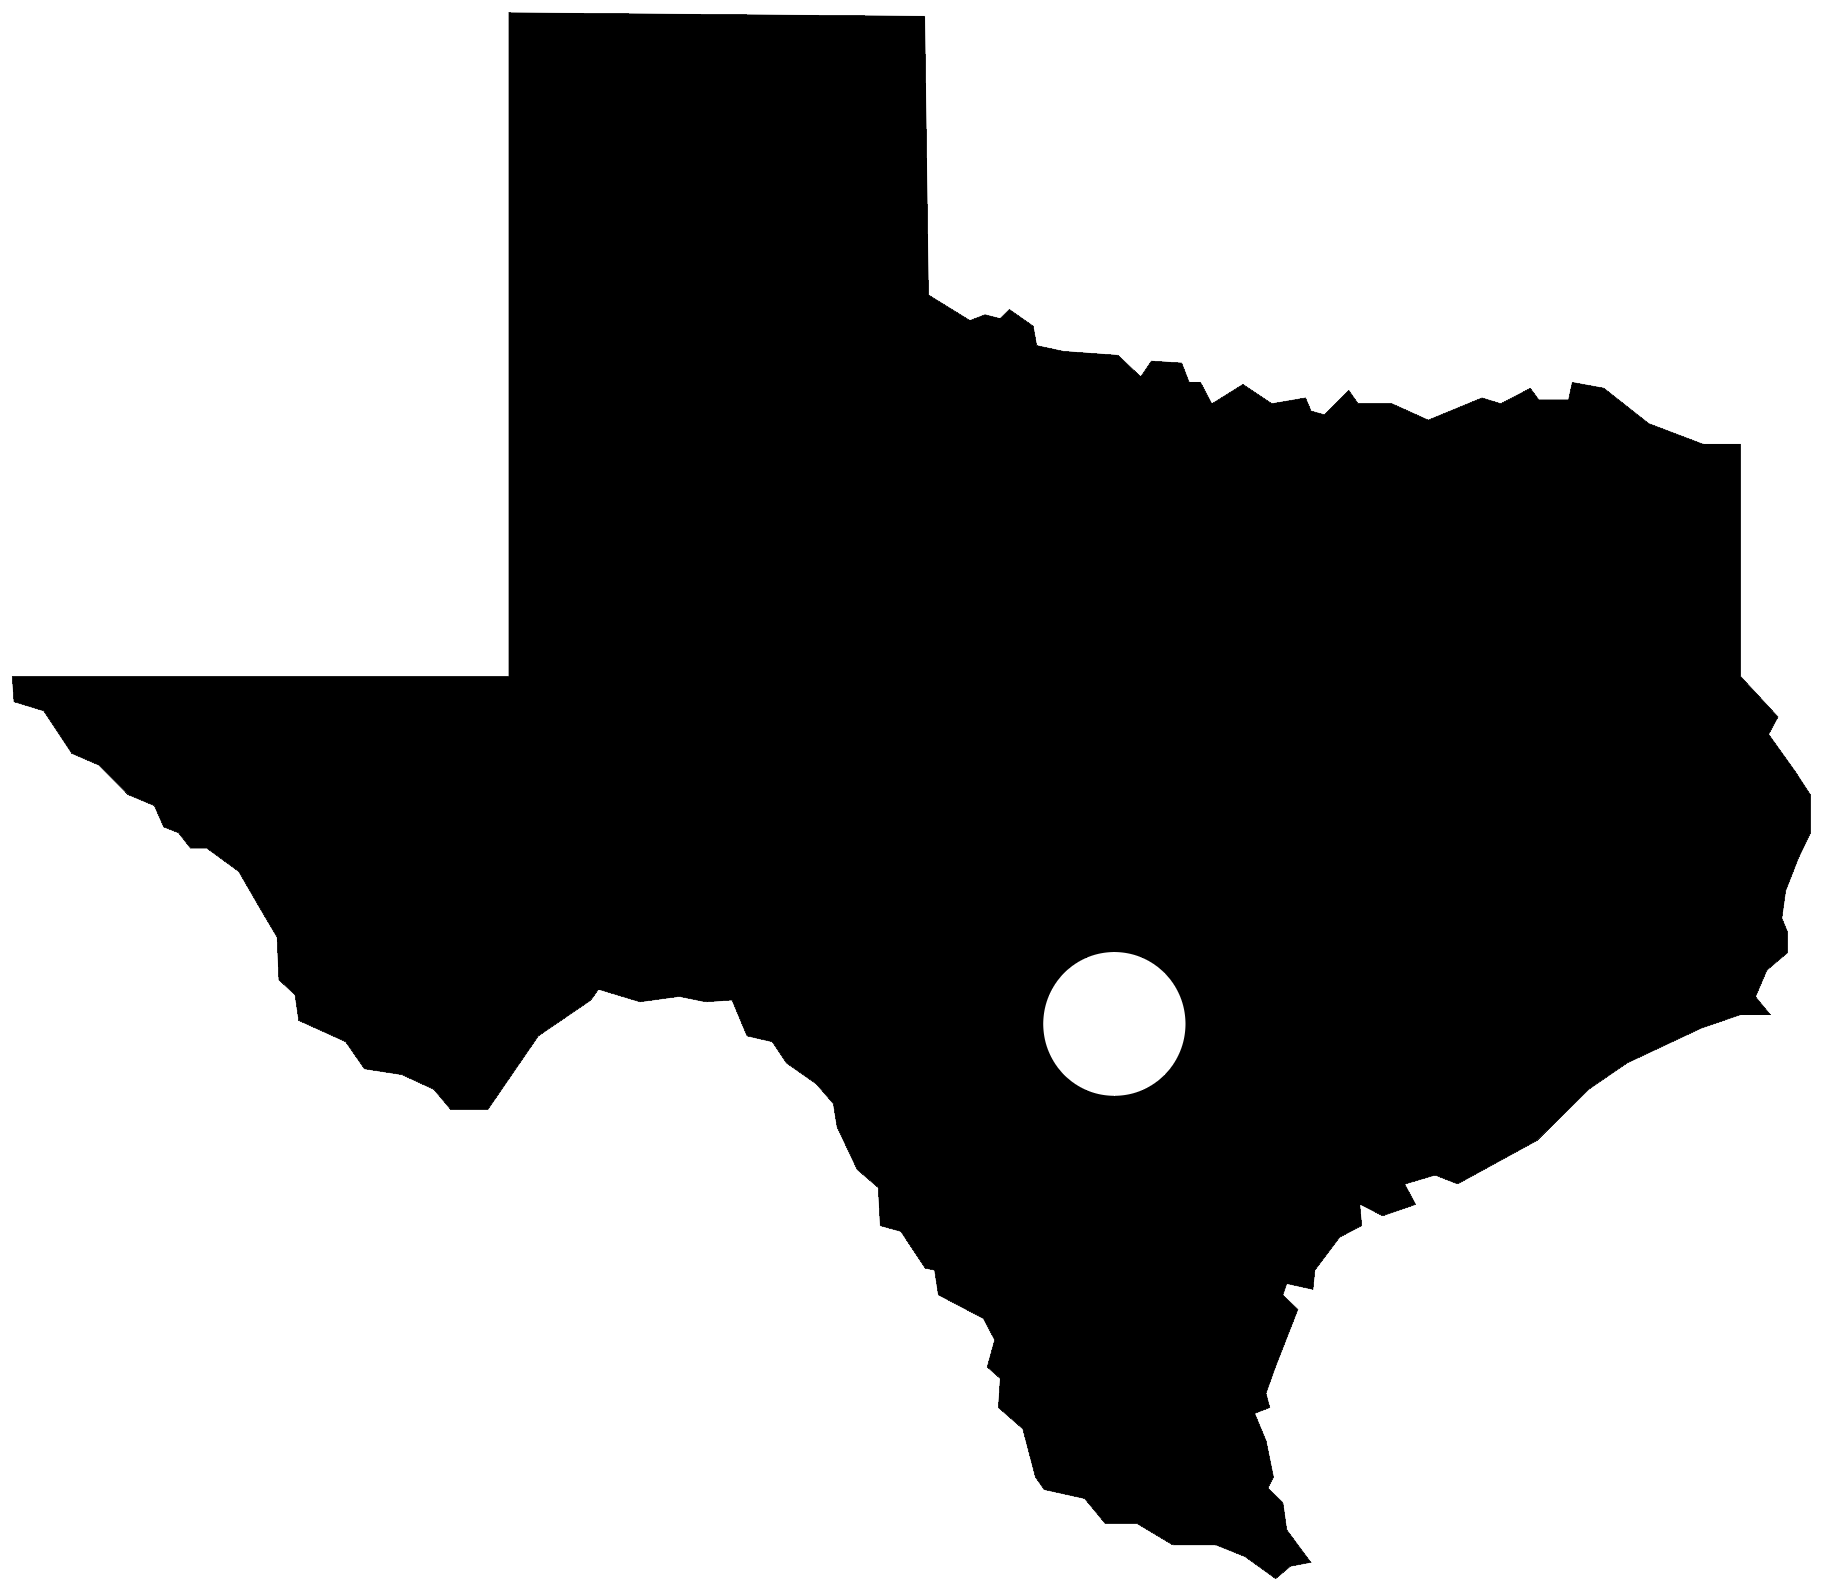 A small map showing the location of Castroville